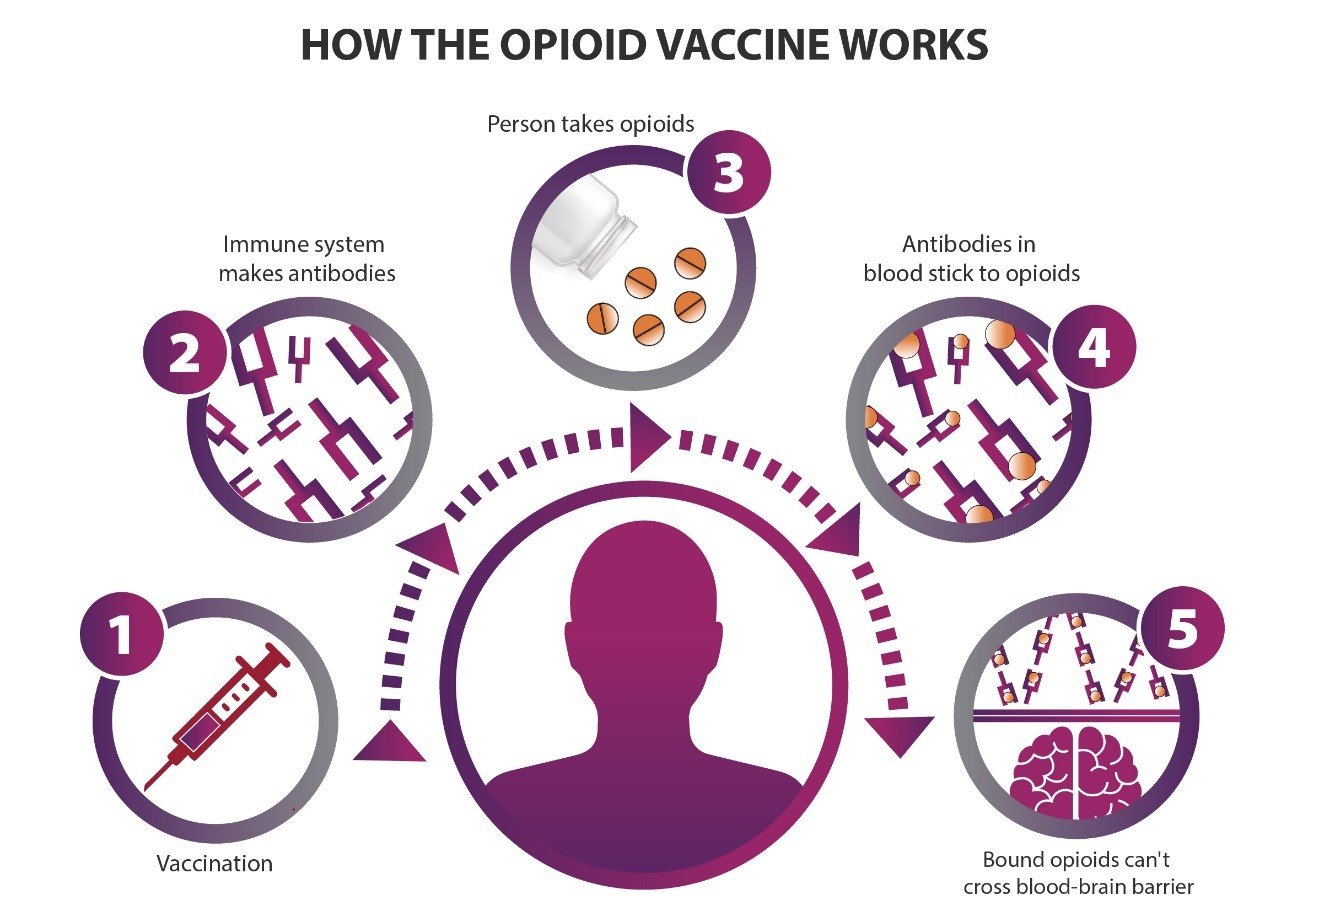 image of how the opioid vaccine works